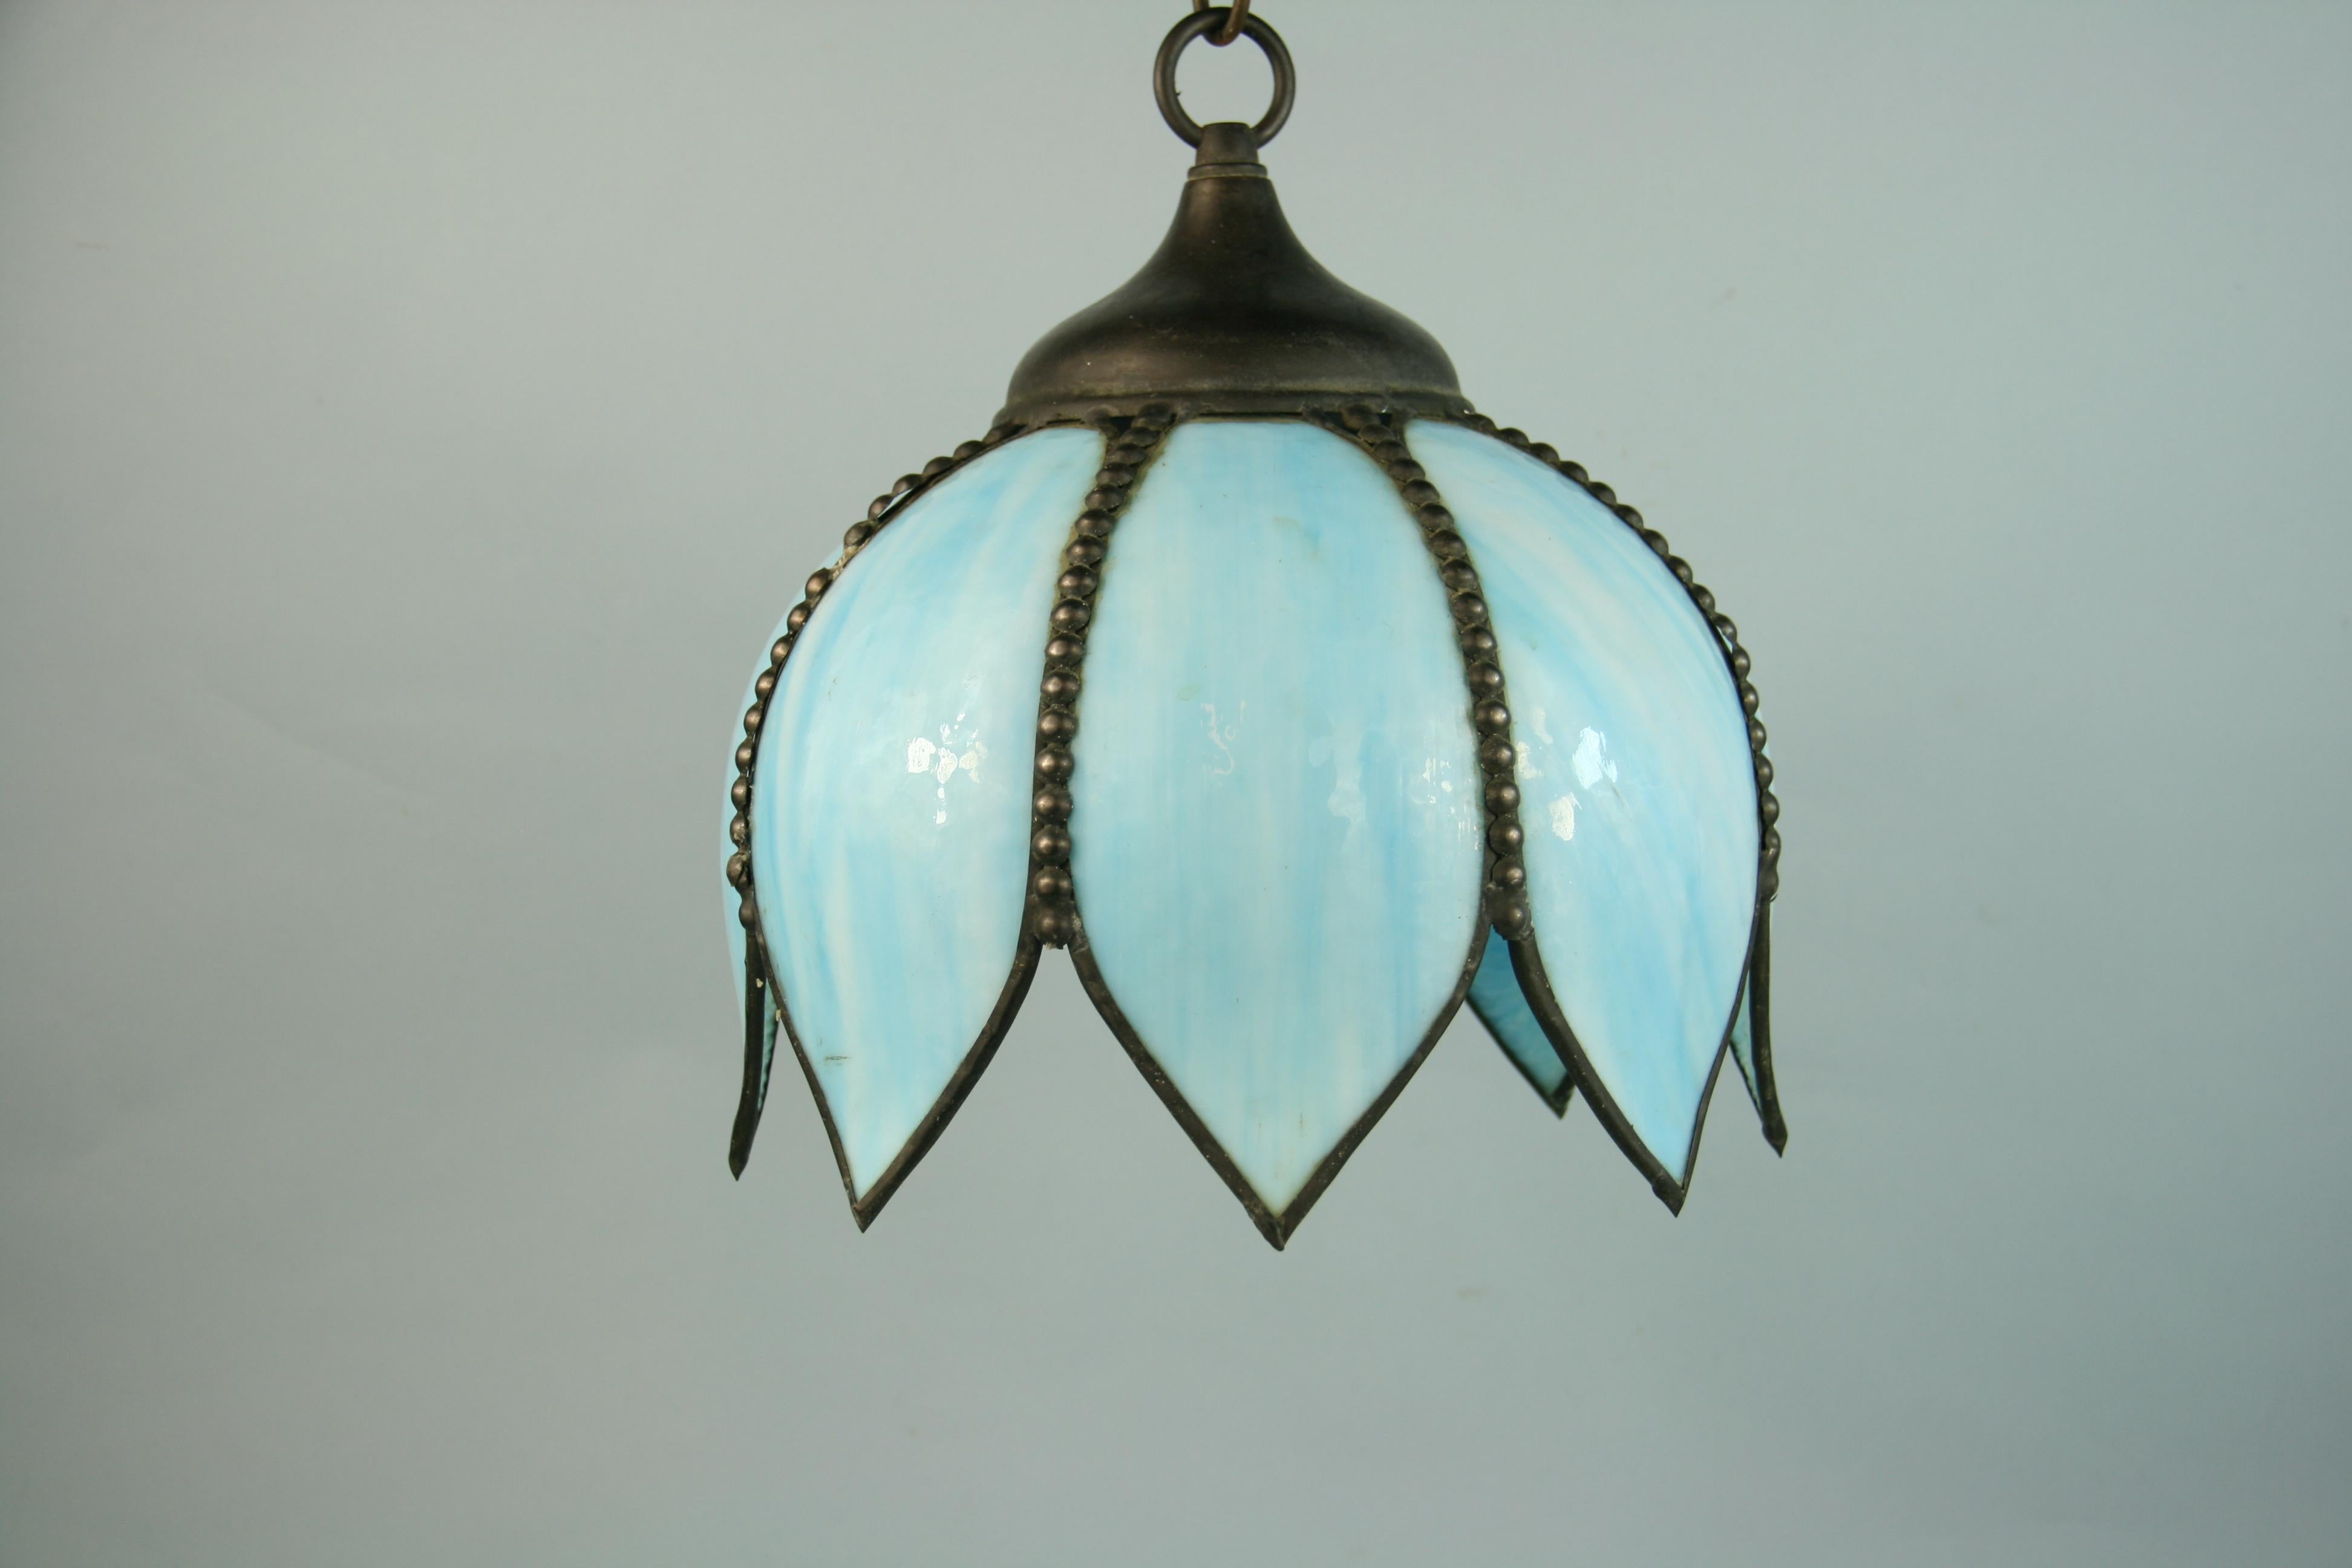 Mid-20th Century Blue Tulip Glass Pendant '2 Available' For Sale